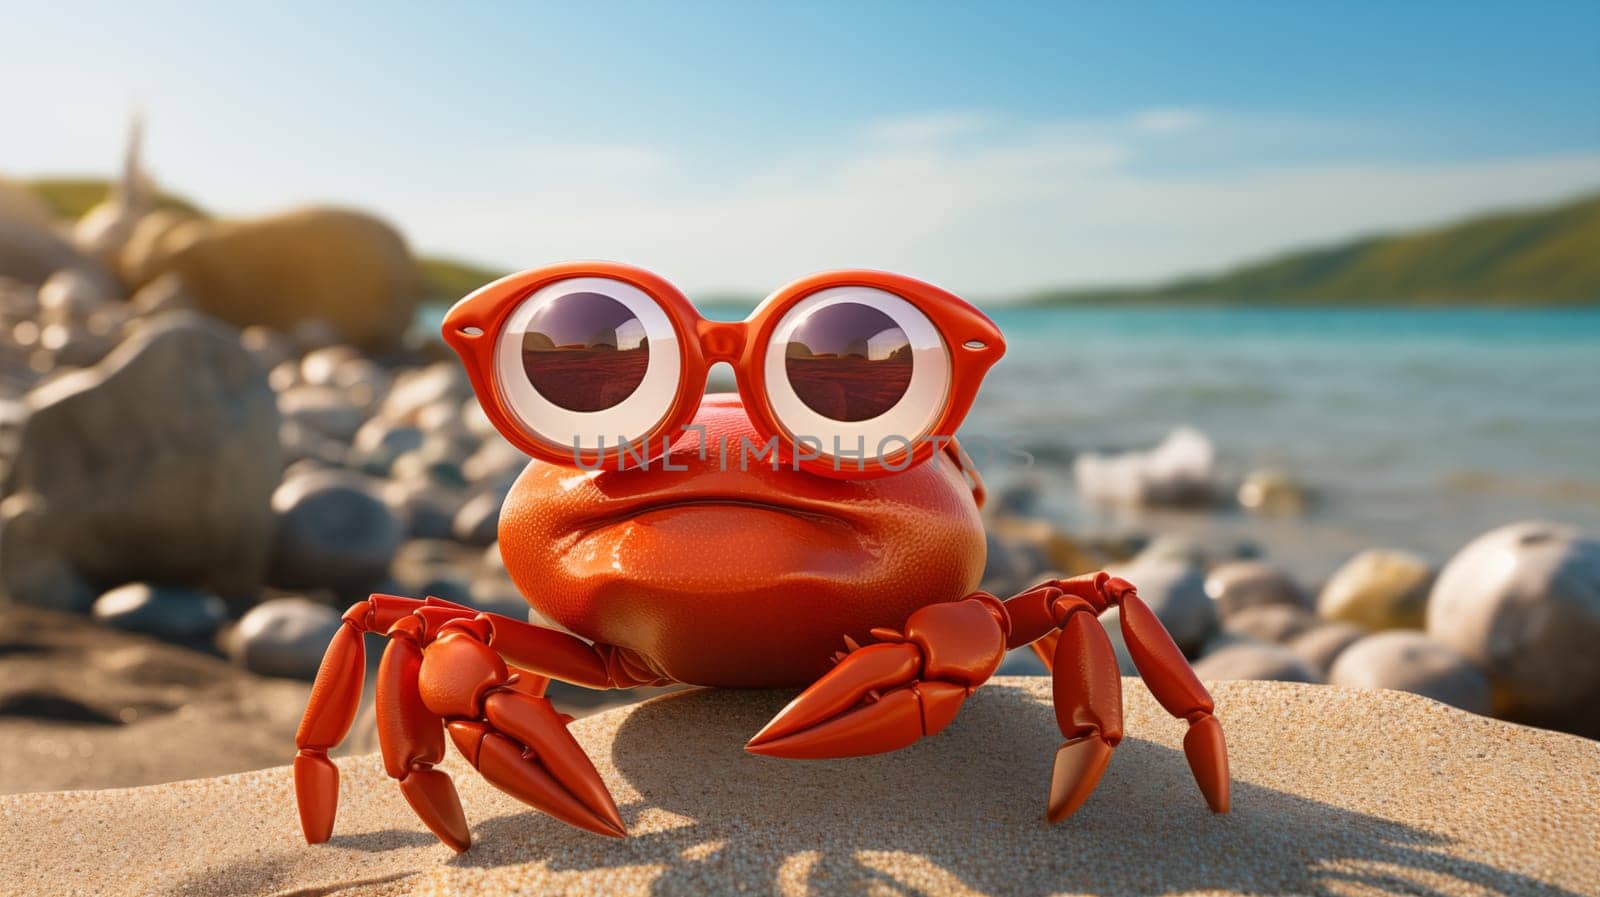 A charming crab with oversized sunglasses, enjoying the sandy shore by Zakharova